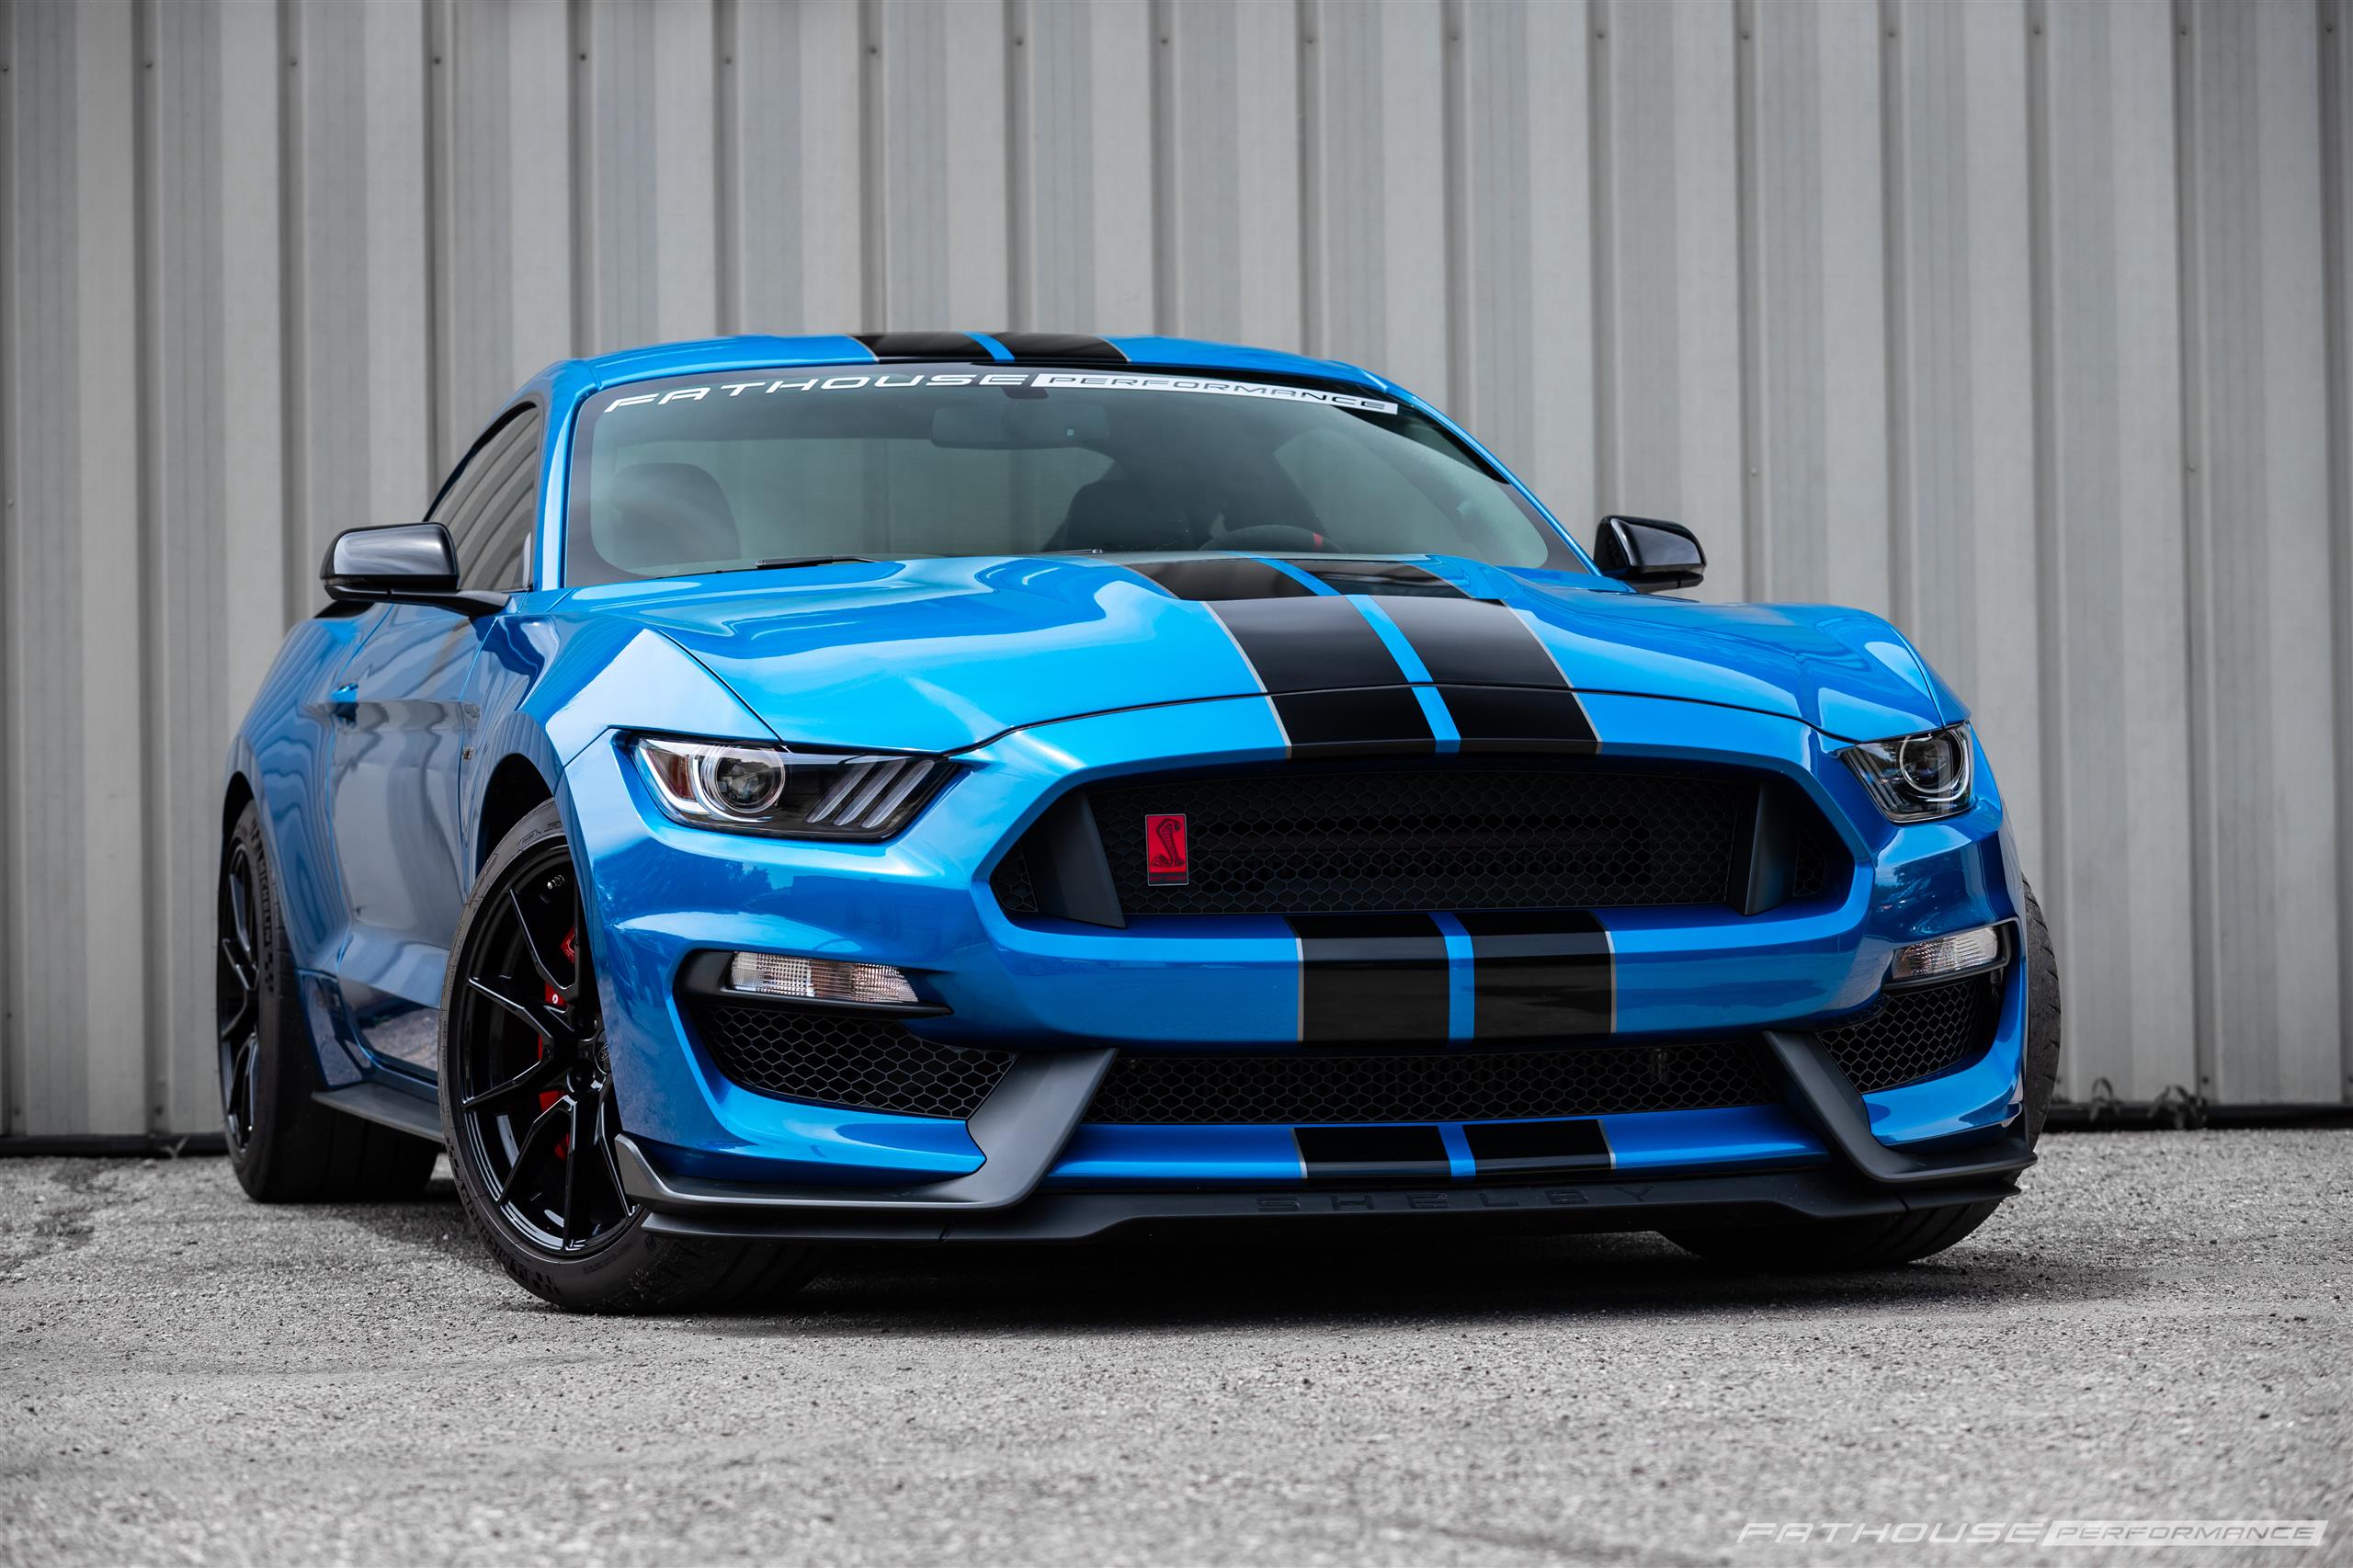 Brian’s 800R Shelby GT350 #19